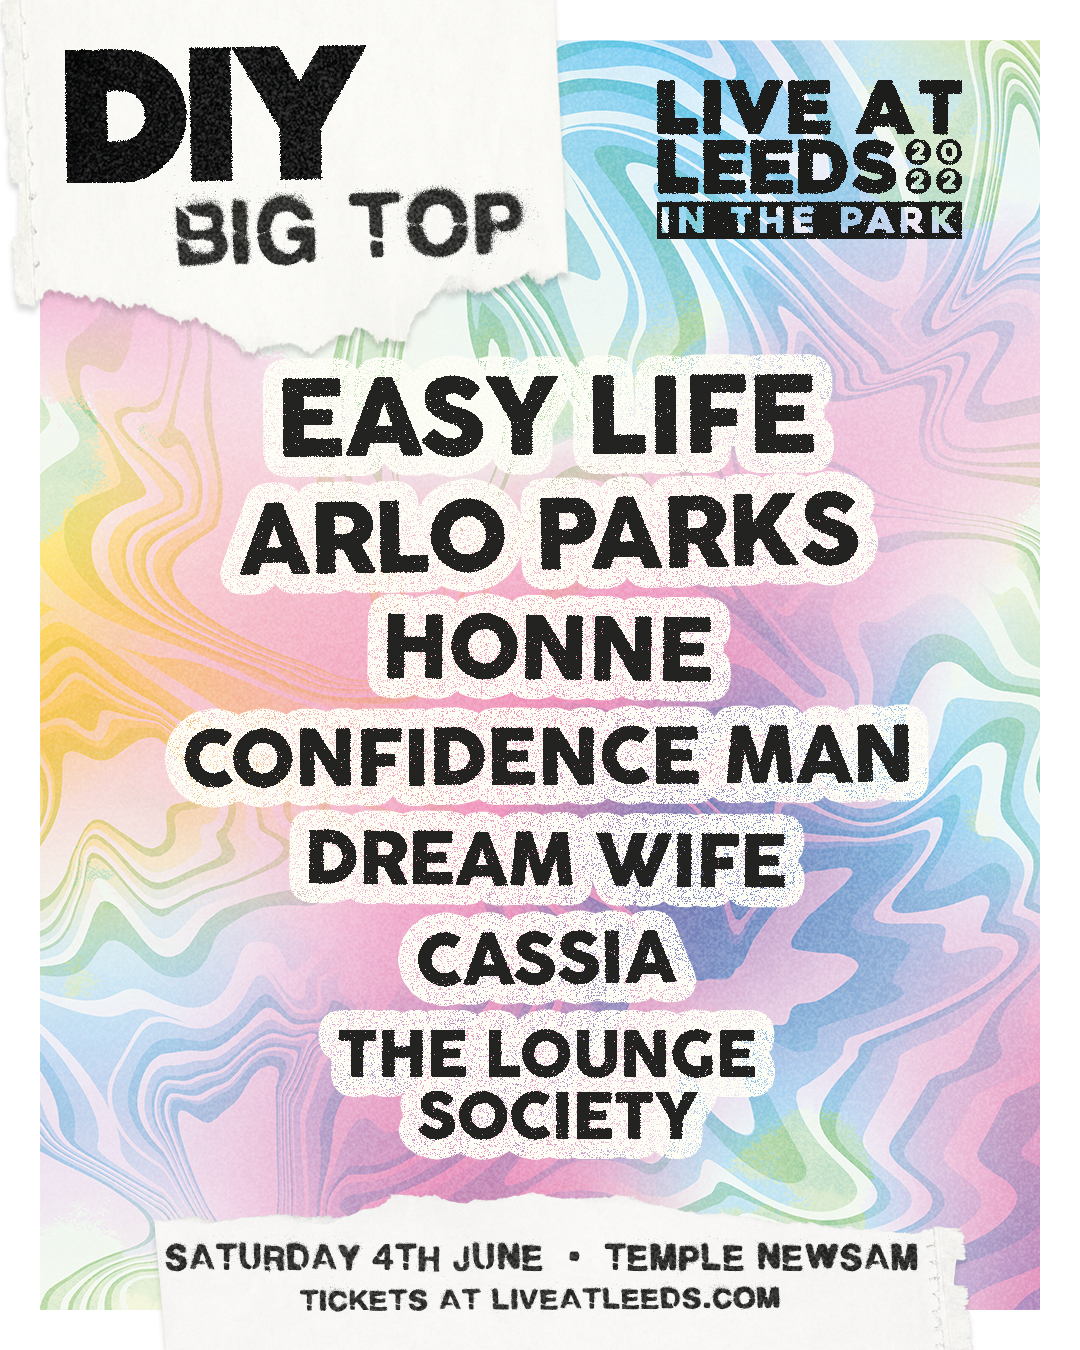 Easy Life, Arlo Parks, Confidence Man and more to play DIY's stage at Live At Leeds: In The Park